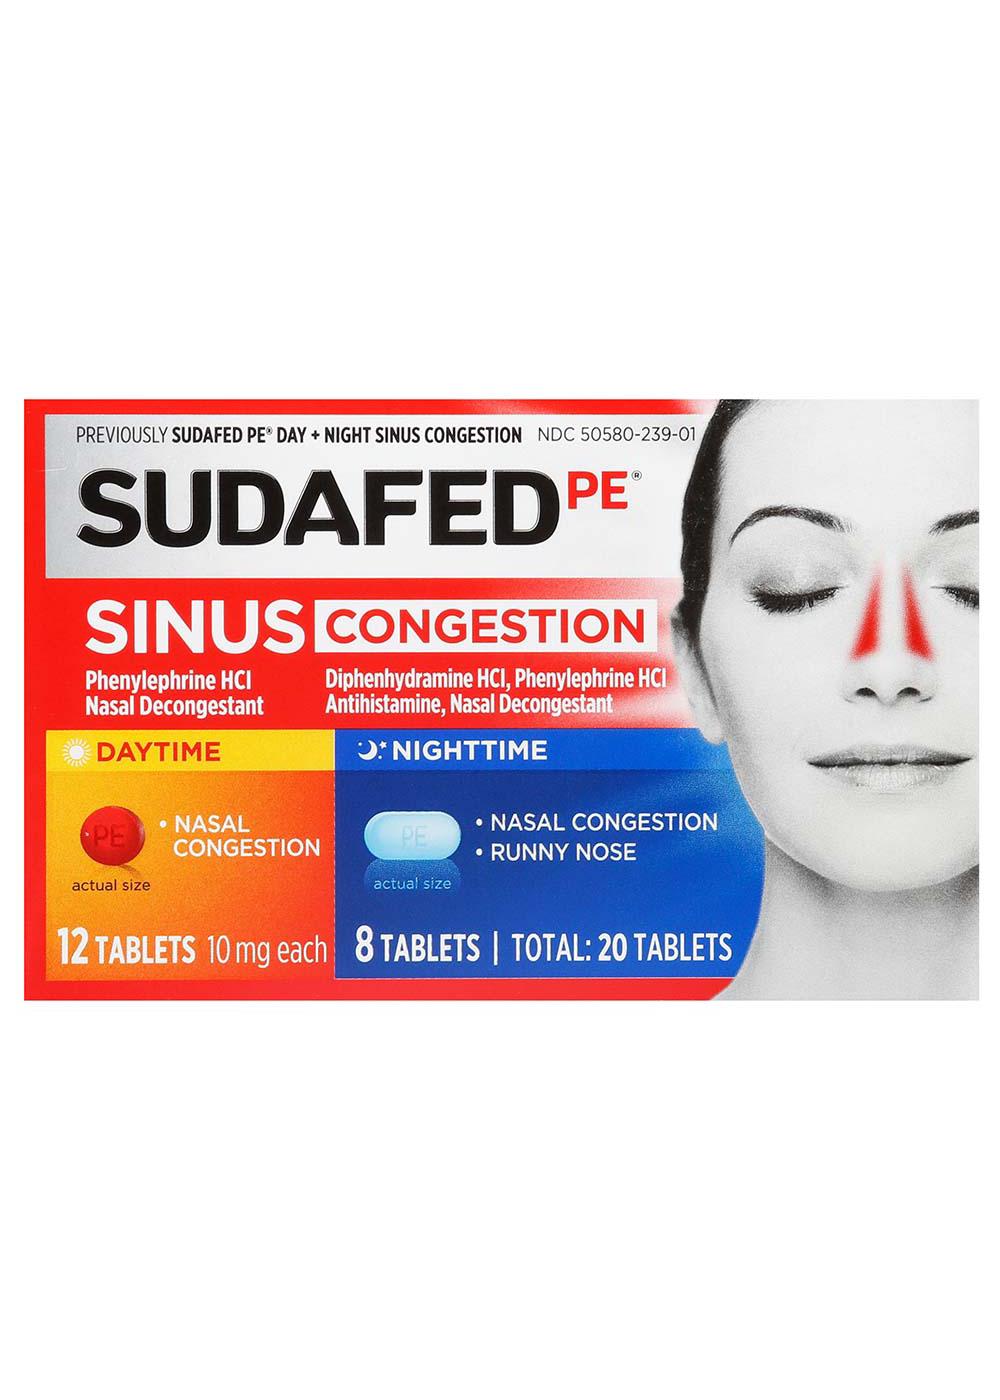 Sudafed PE Sinus Congestion Day + Night Tablets; image 1 of 6